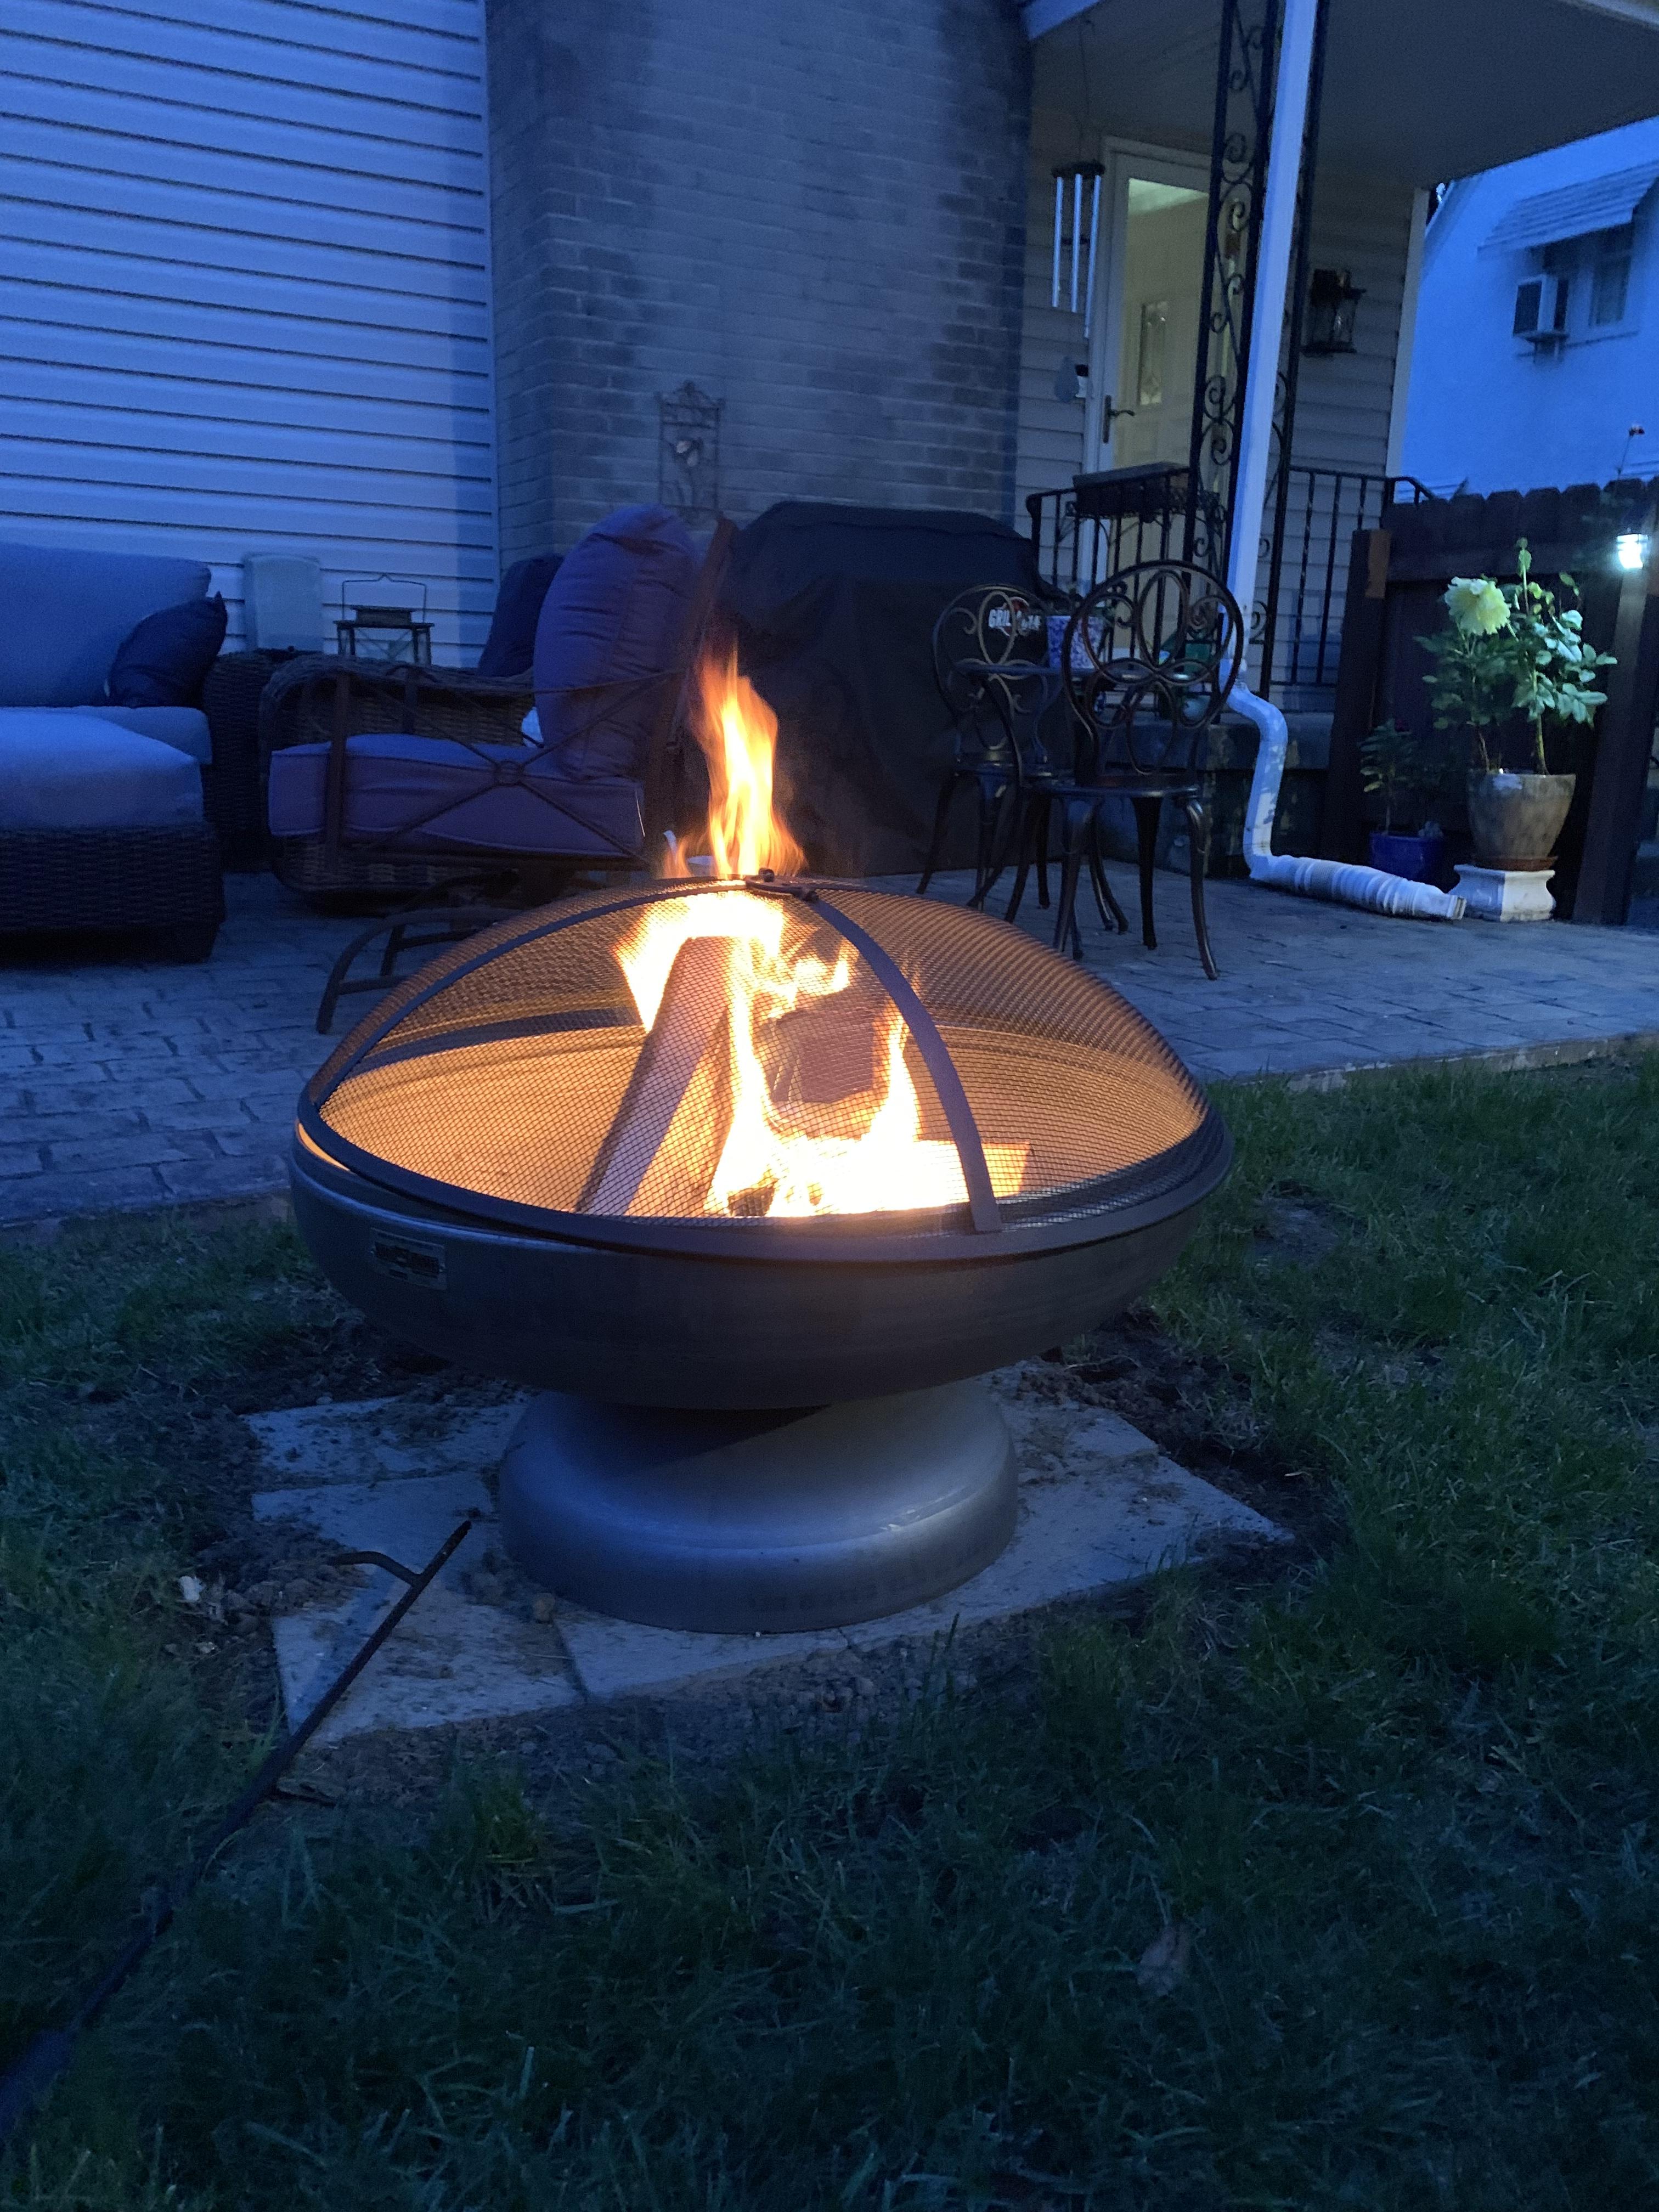 Patriot Fire Pit Made In Usa Ohio Flame, Ohio Flame Patriot Fire Pit